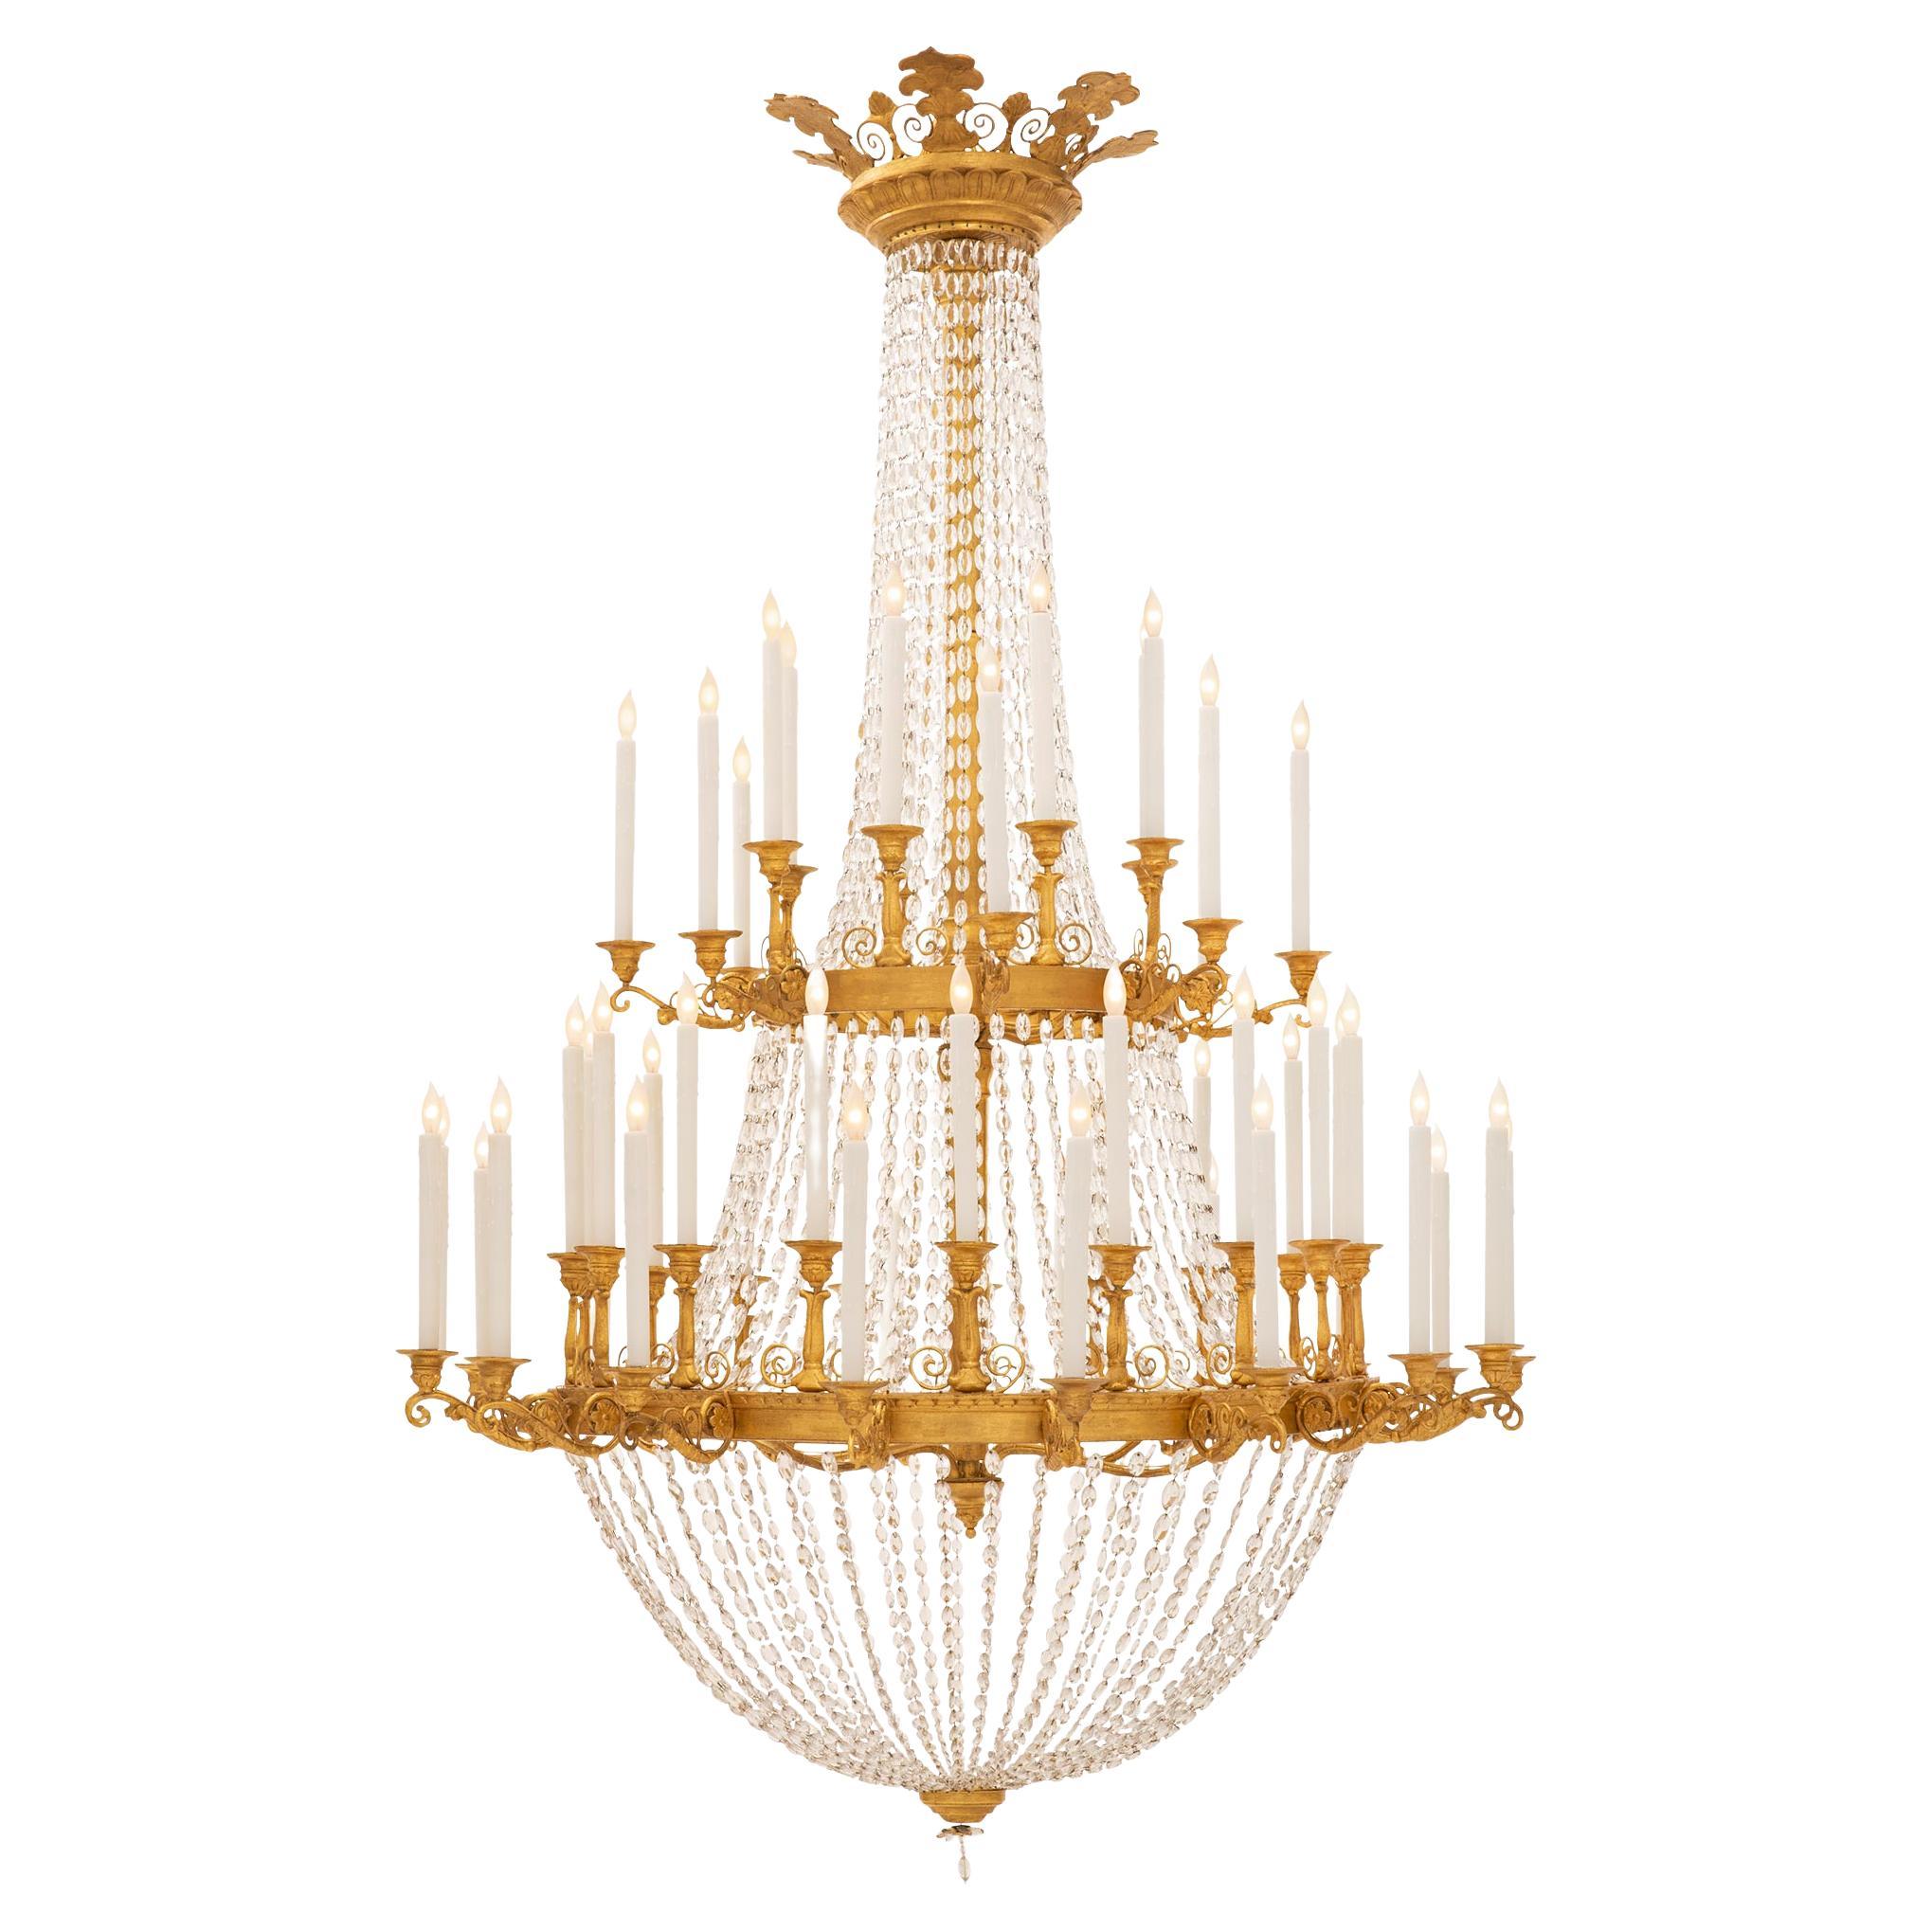 An Italian 18th century Neo-Classical st. giltwood and crystal chandelier For Sale